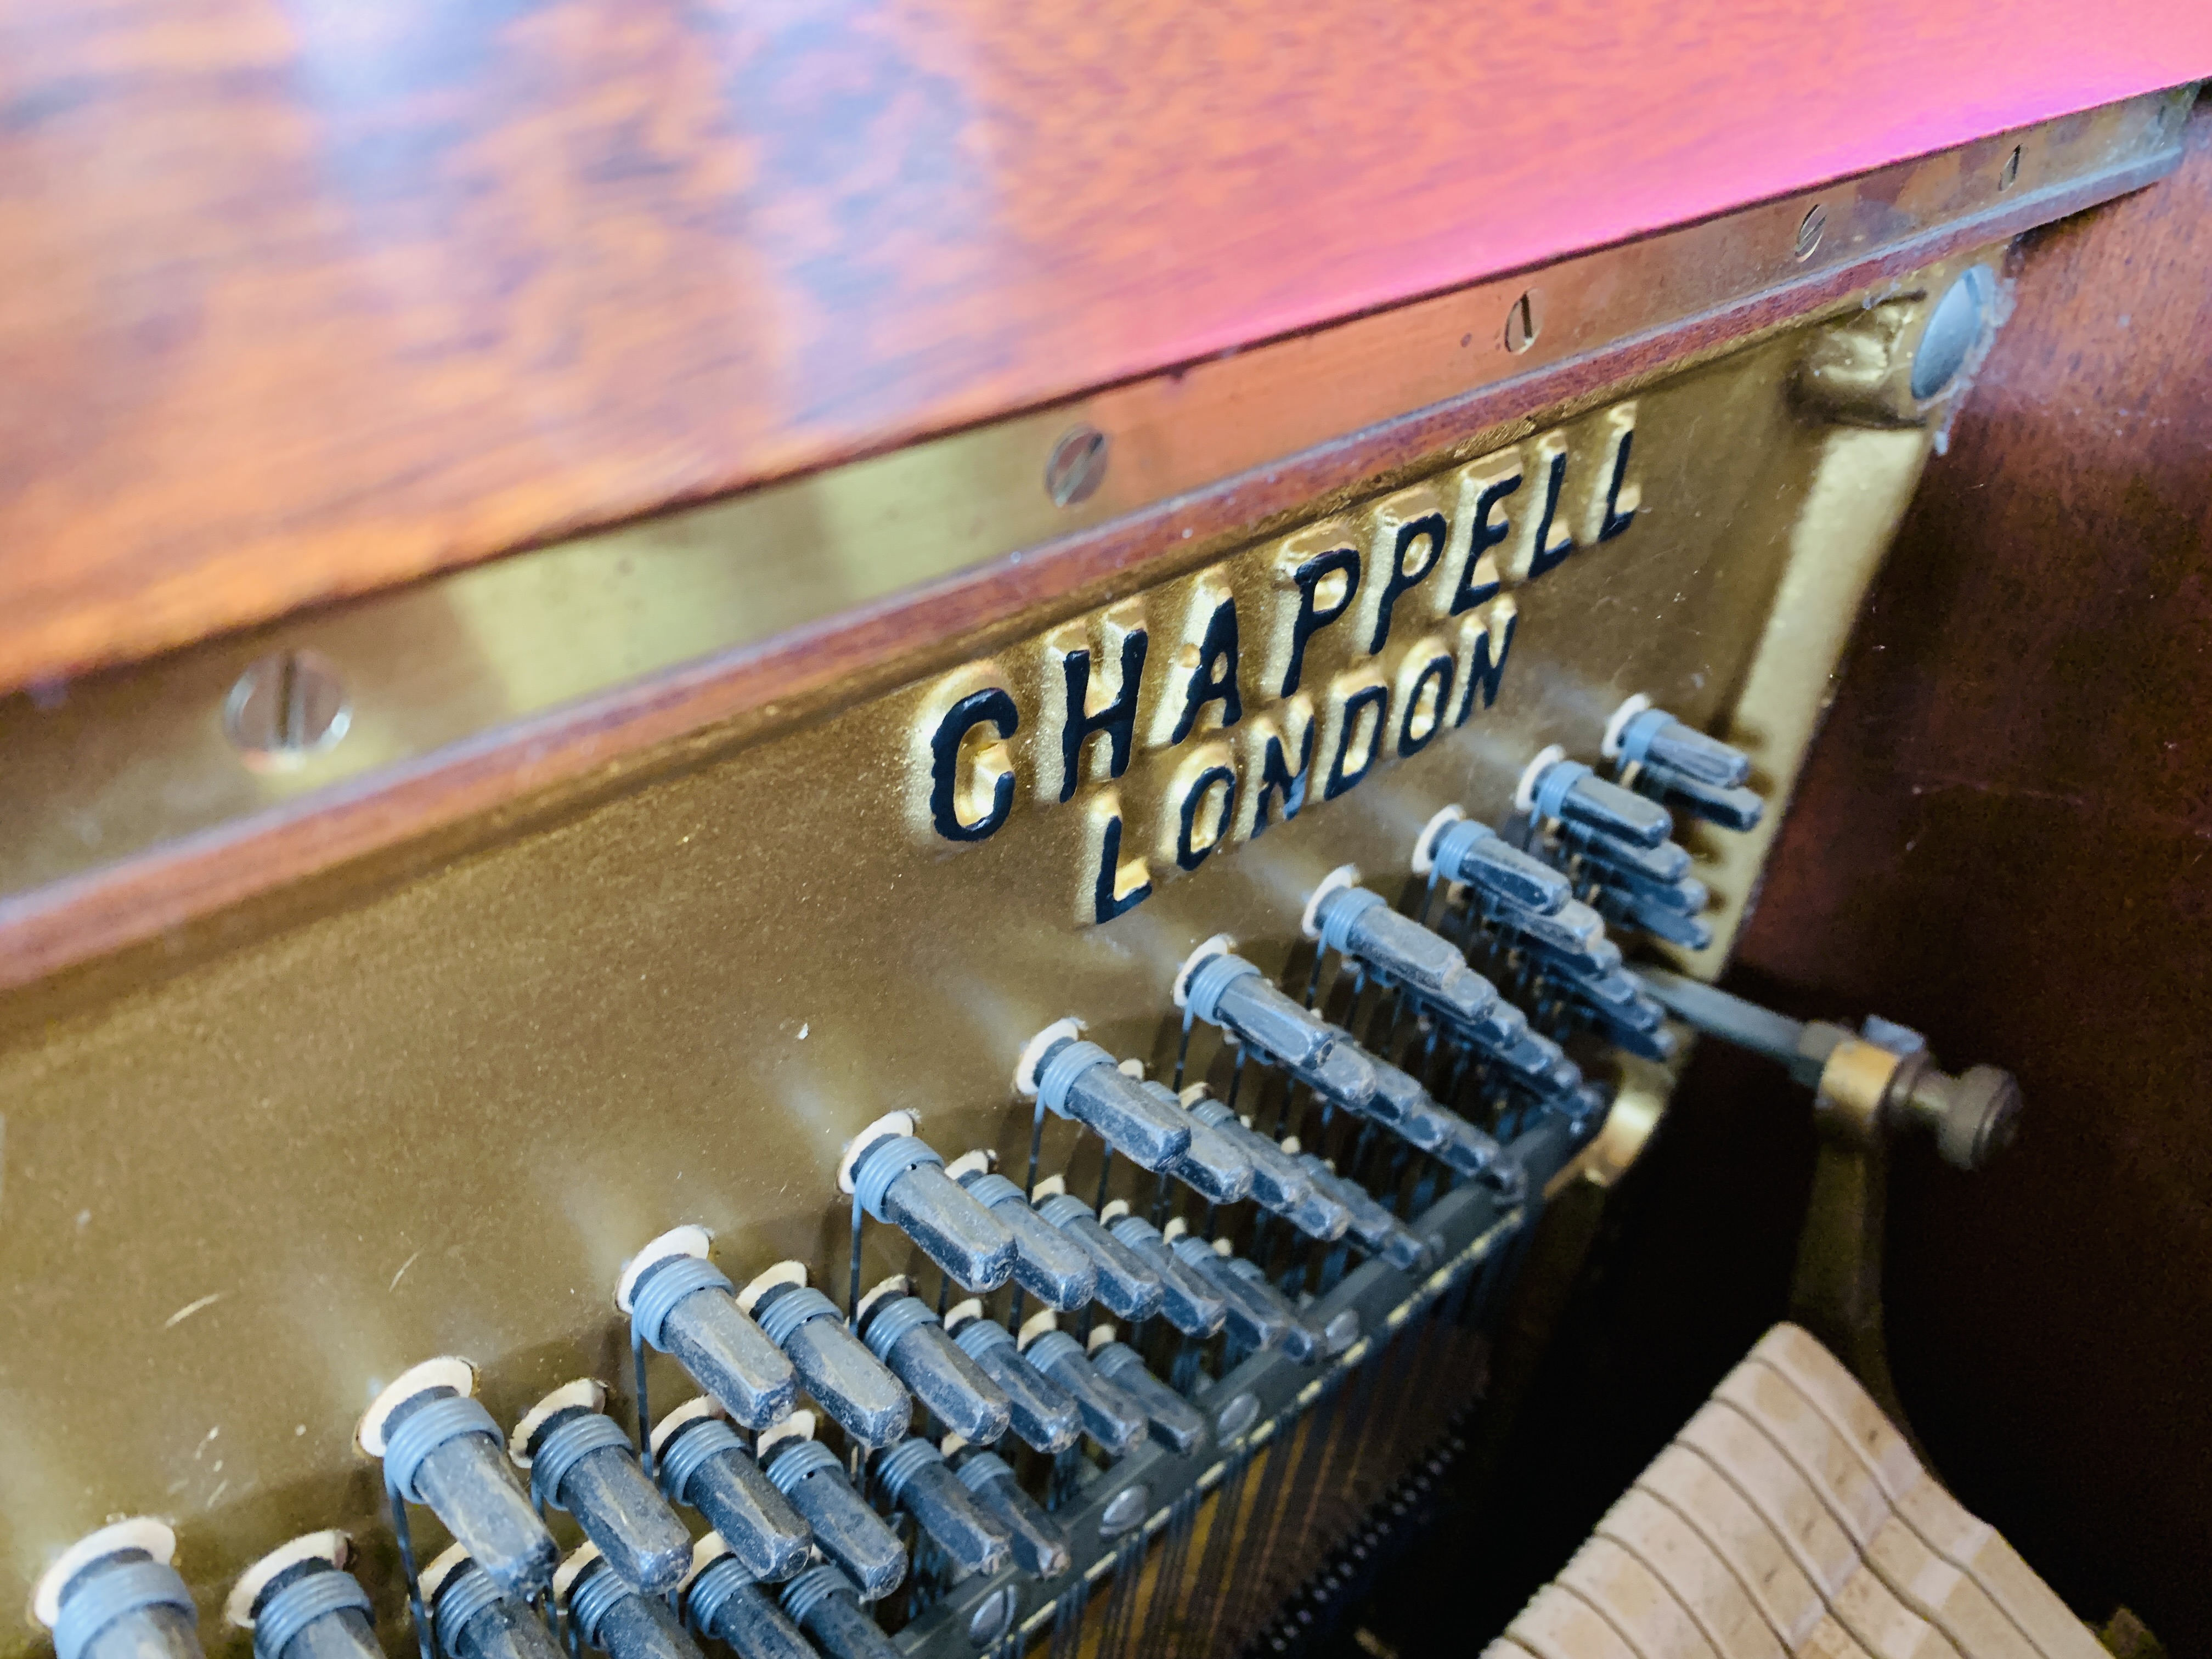 A CHAPPELL UPRIGHT OVERSTRUNG PIANO - Image 15 of 16